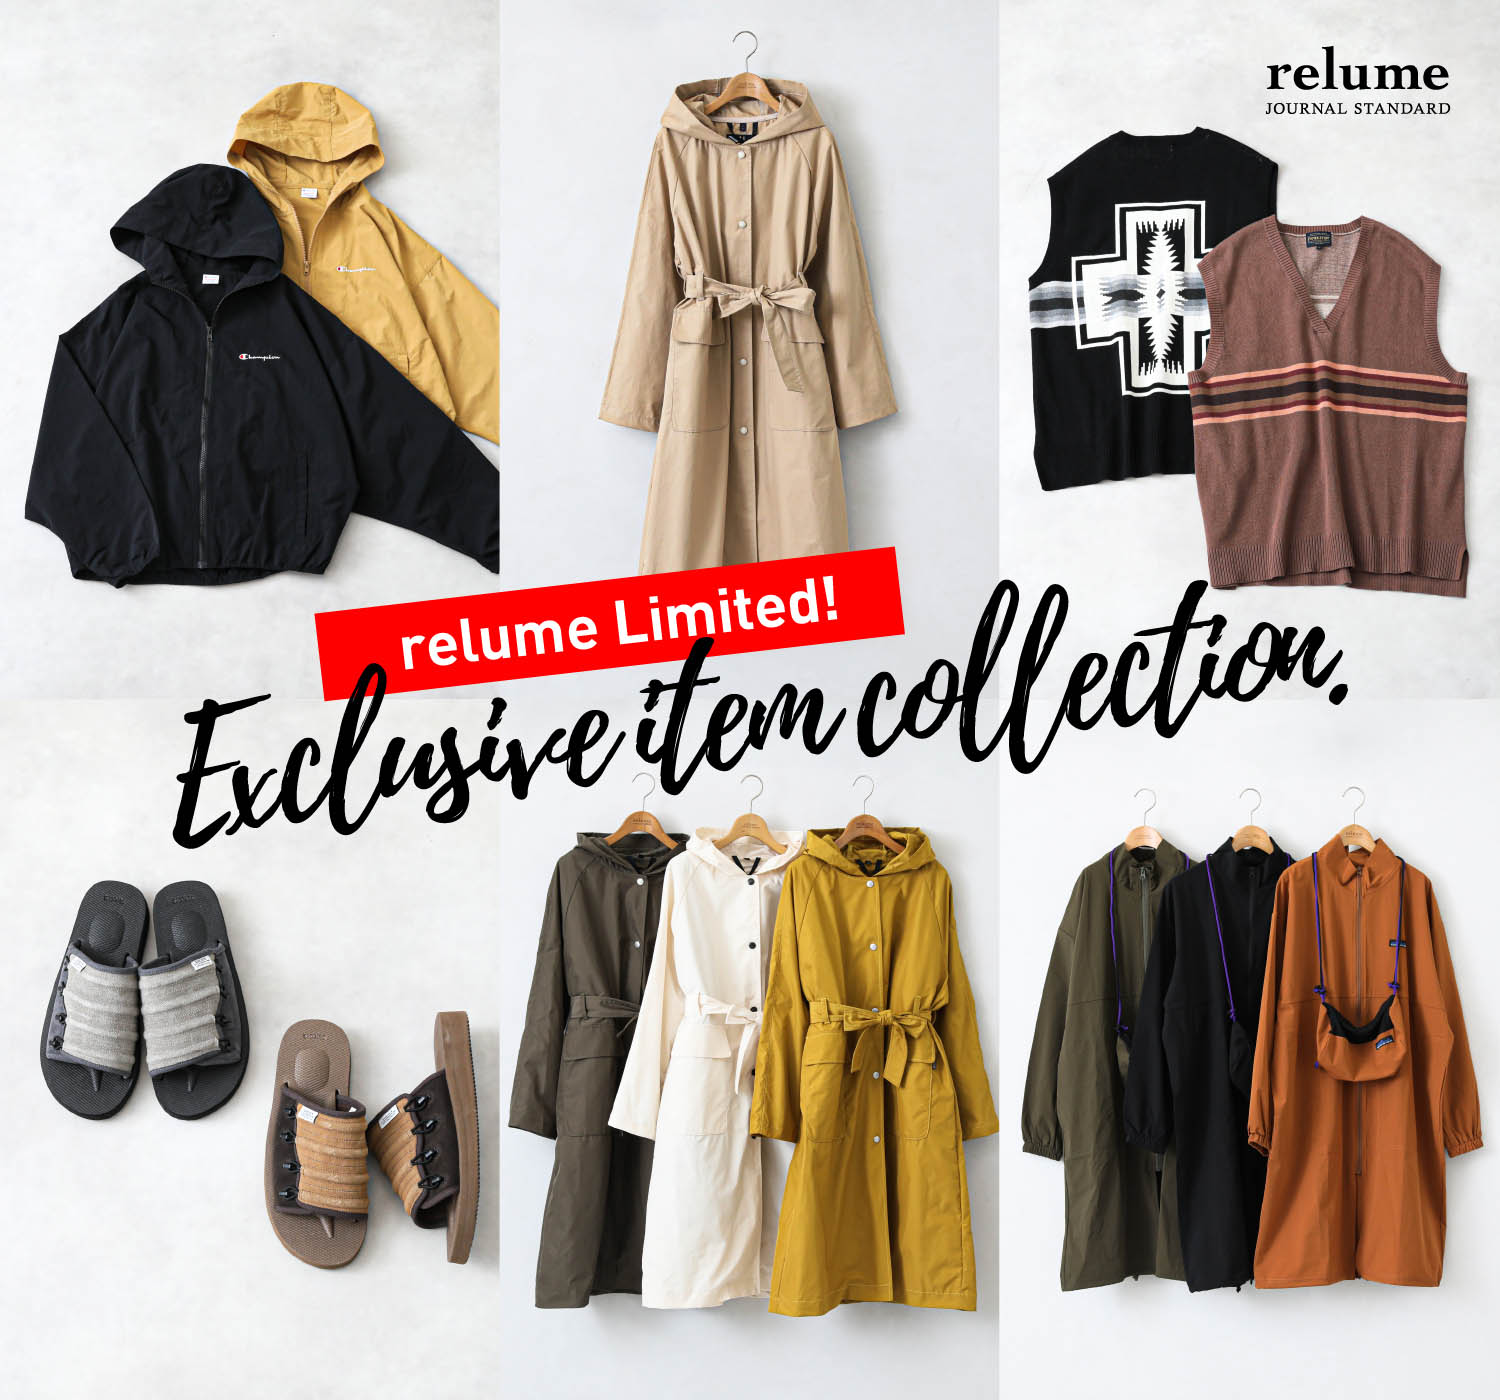 relume LIMITED！EXCLUSIVE ITEM COLLECTION｜JOURNAL STANDARD relume